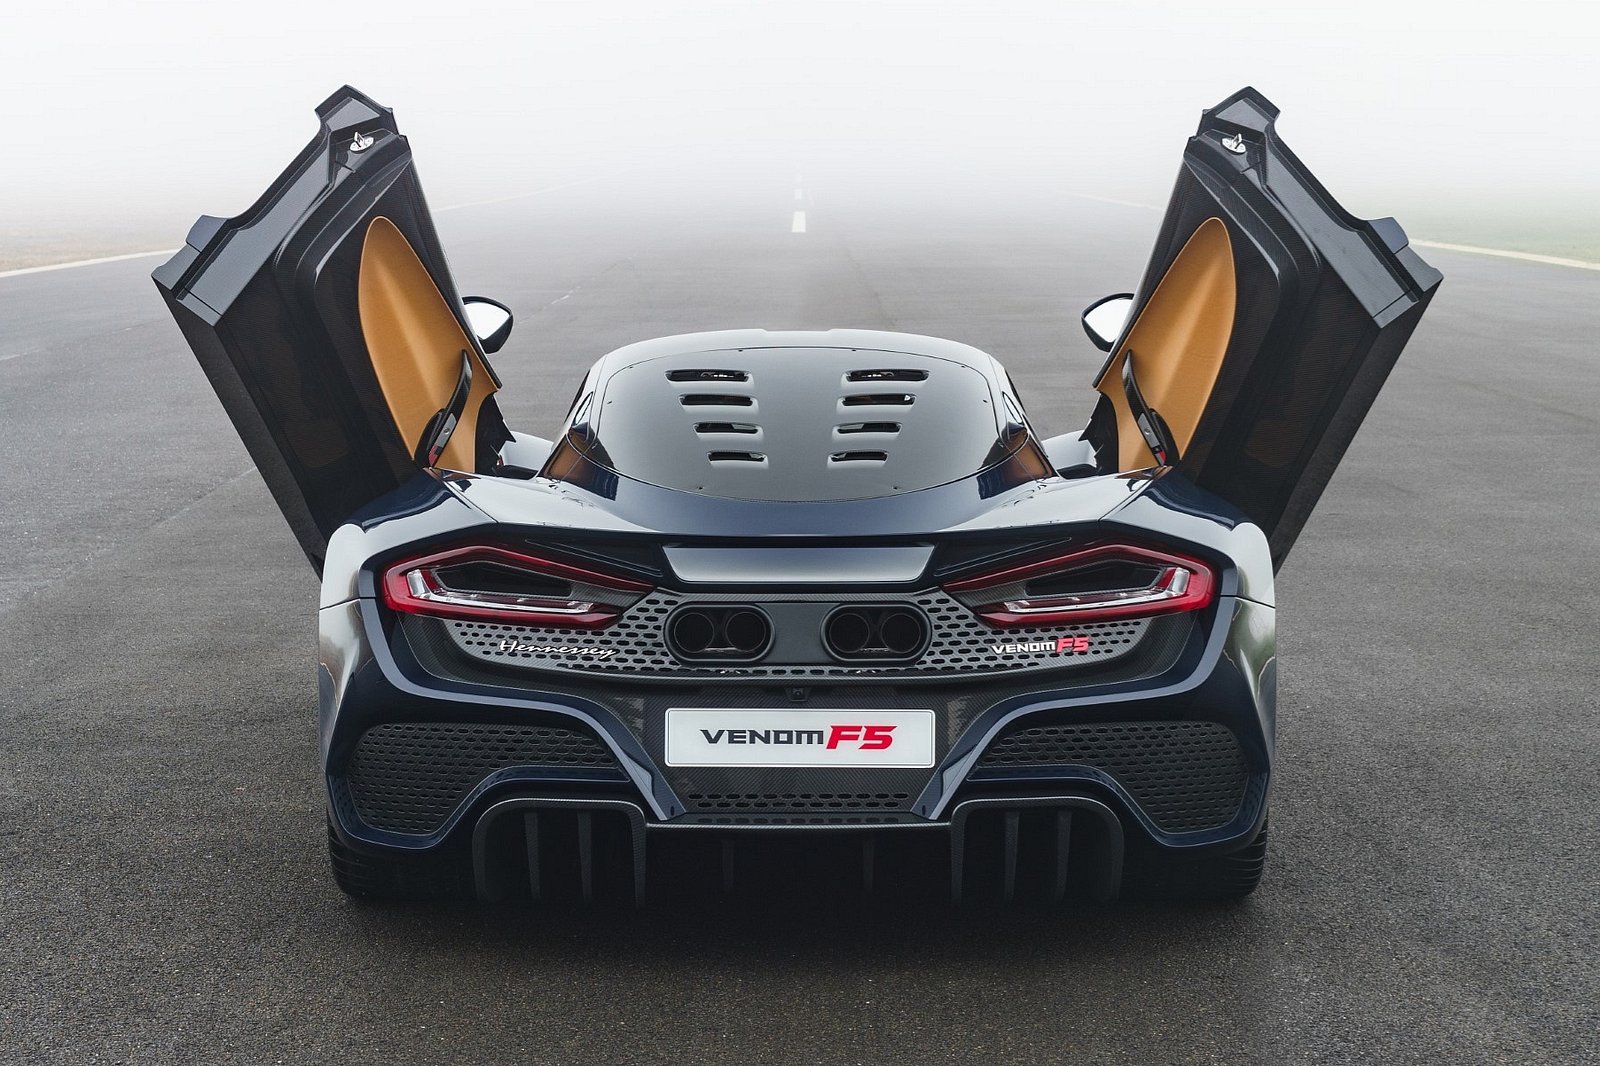 supercars, sports cars, legendary german supercar will inspire hennessey's f5 venom replacement